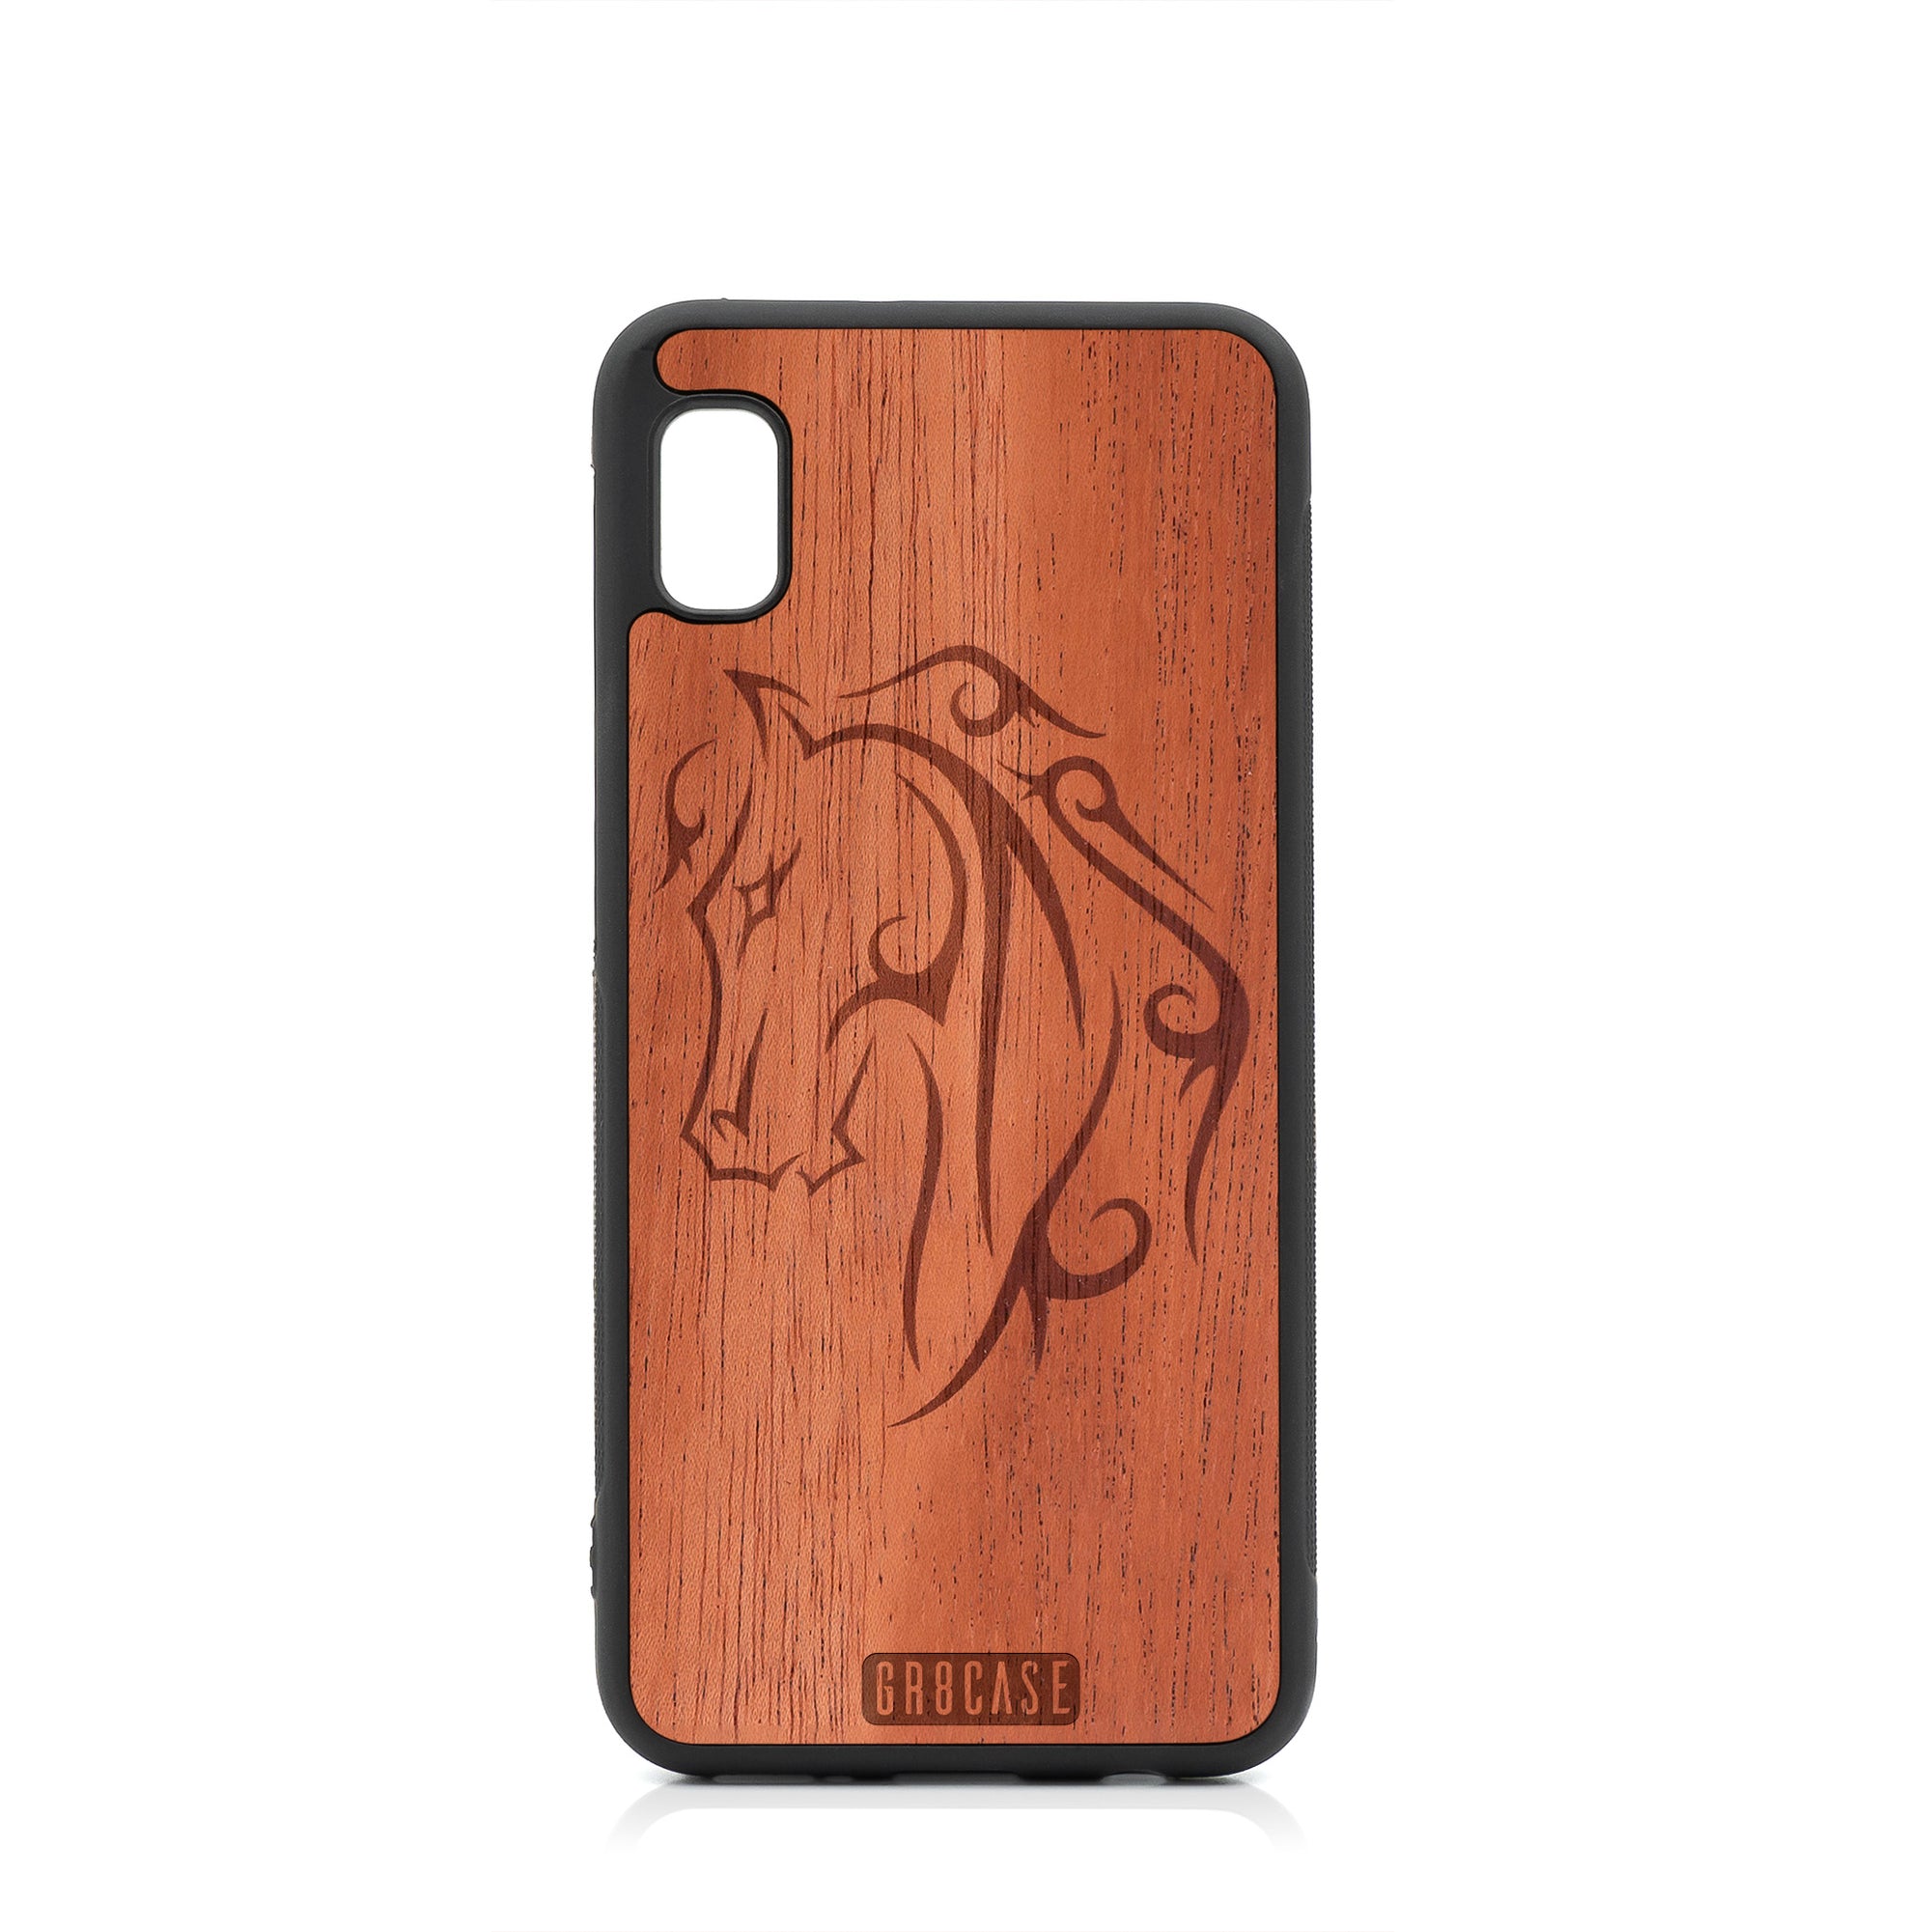 Horse Tattoo Design Wood Case For Samsung Galaxy A10E by GR8CASE